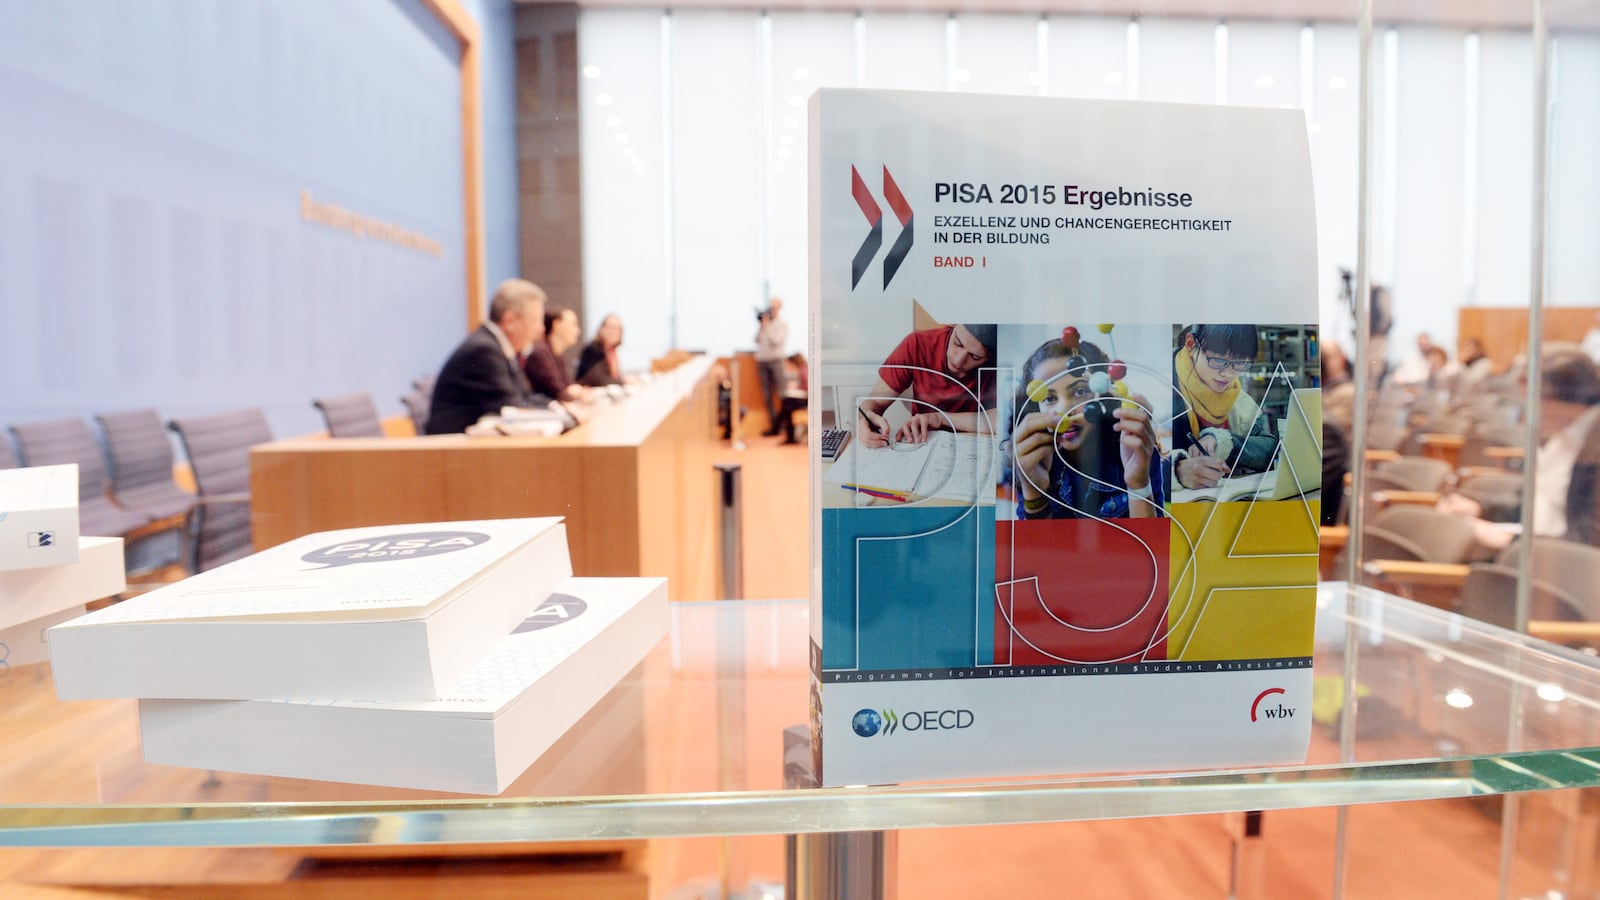 The OECD presented PISA results from 2015 at a press conference in Berlin, Germany, 6 December 2016. (Photo by Maurizio Gambarini/picture alliance via Getty Images)